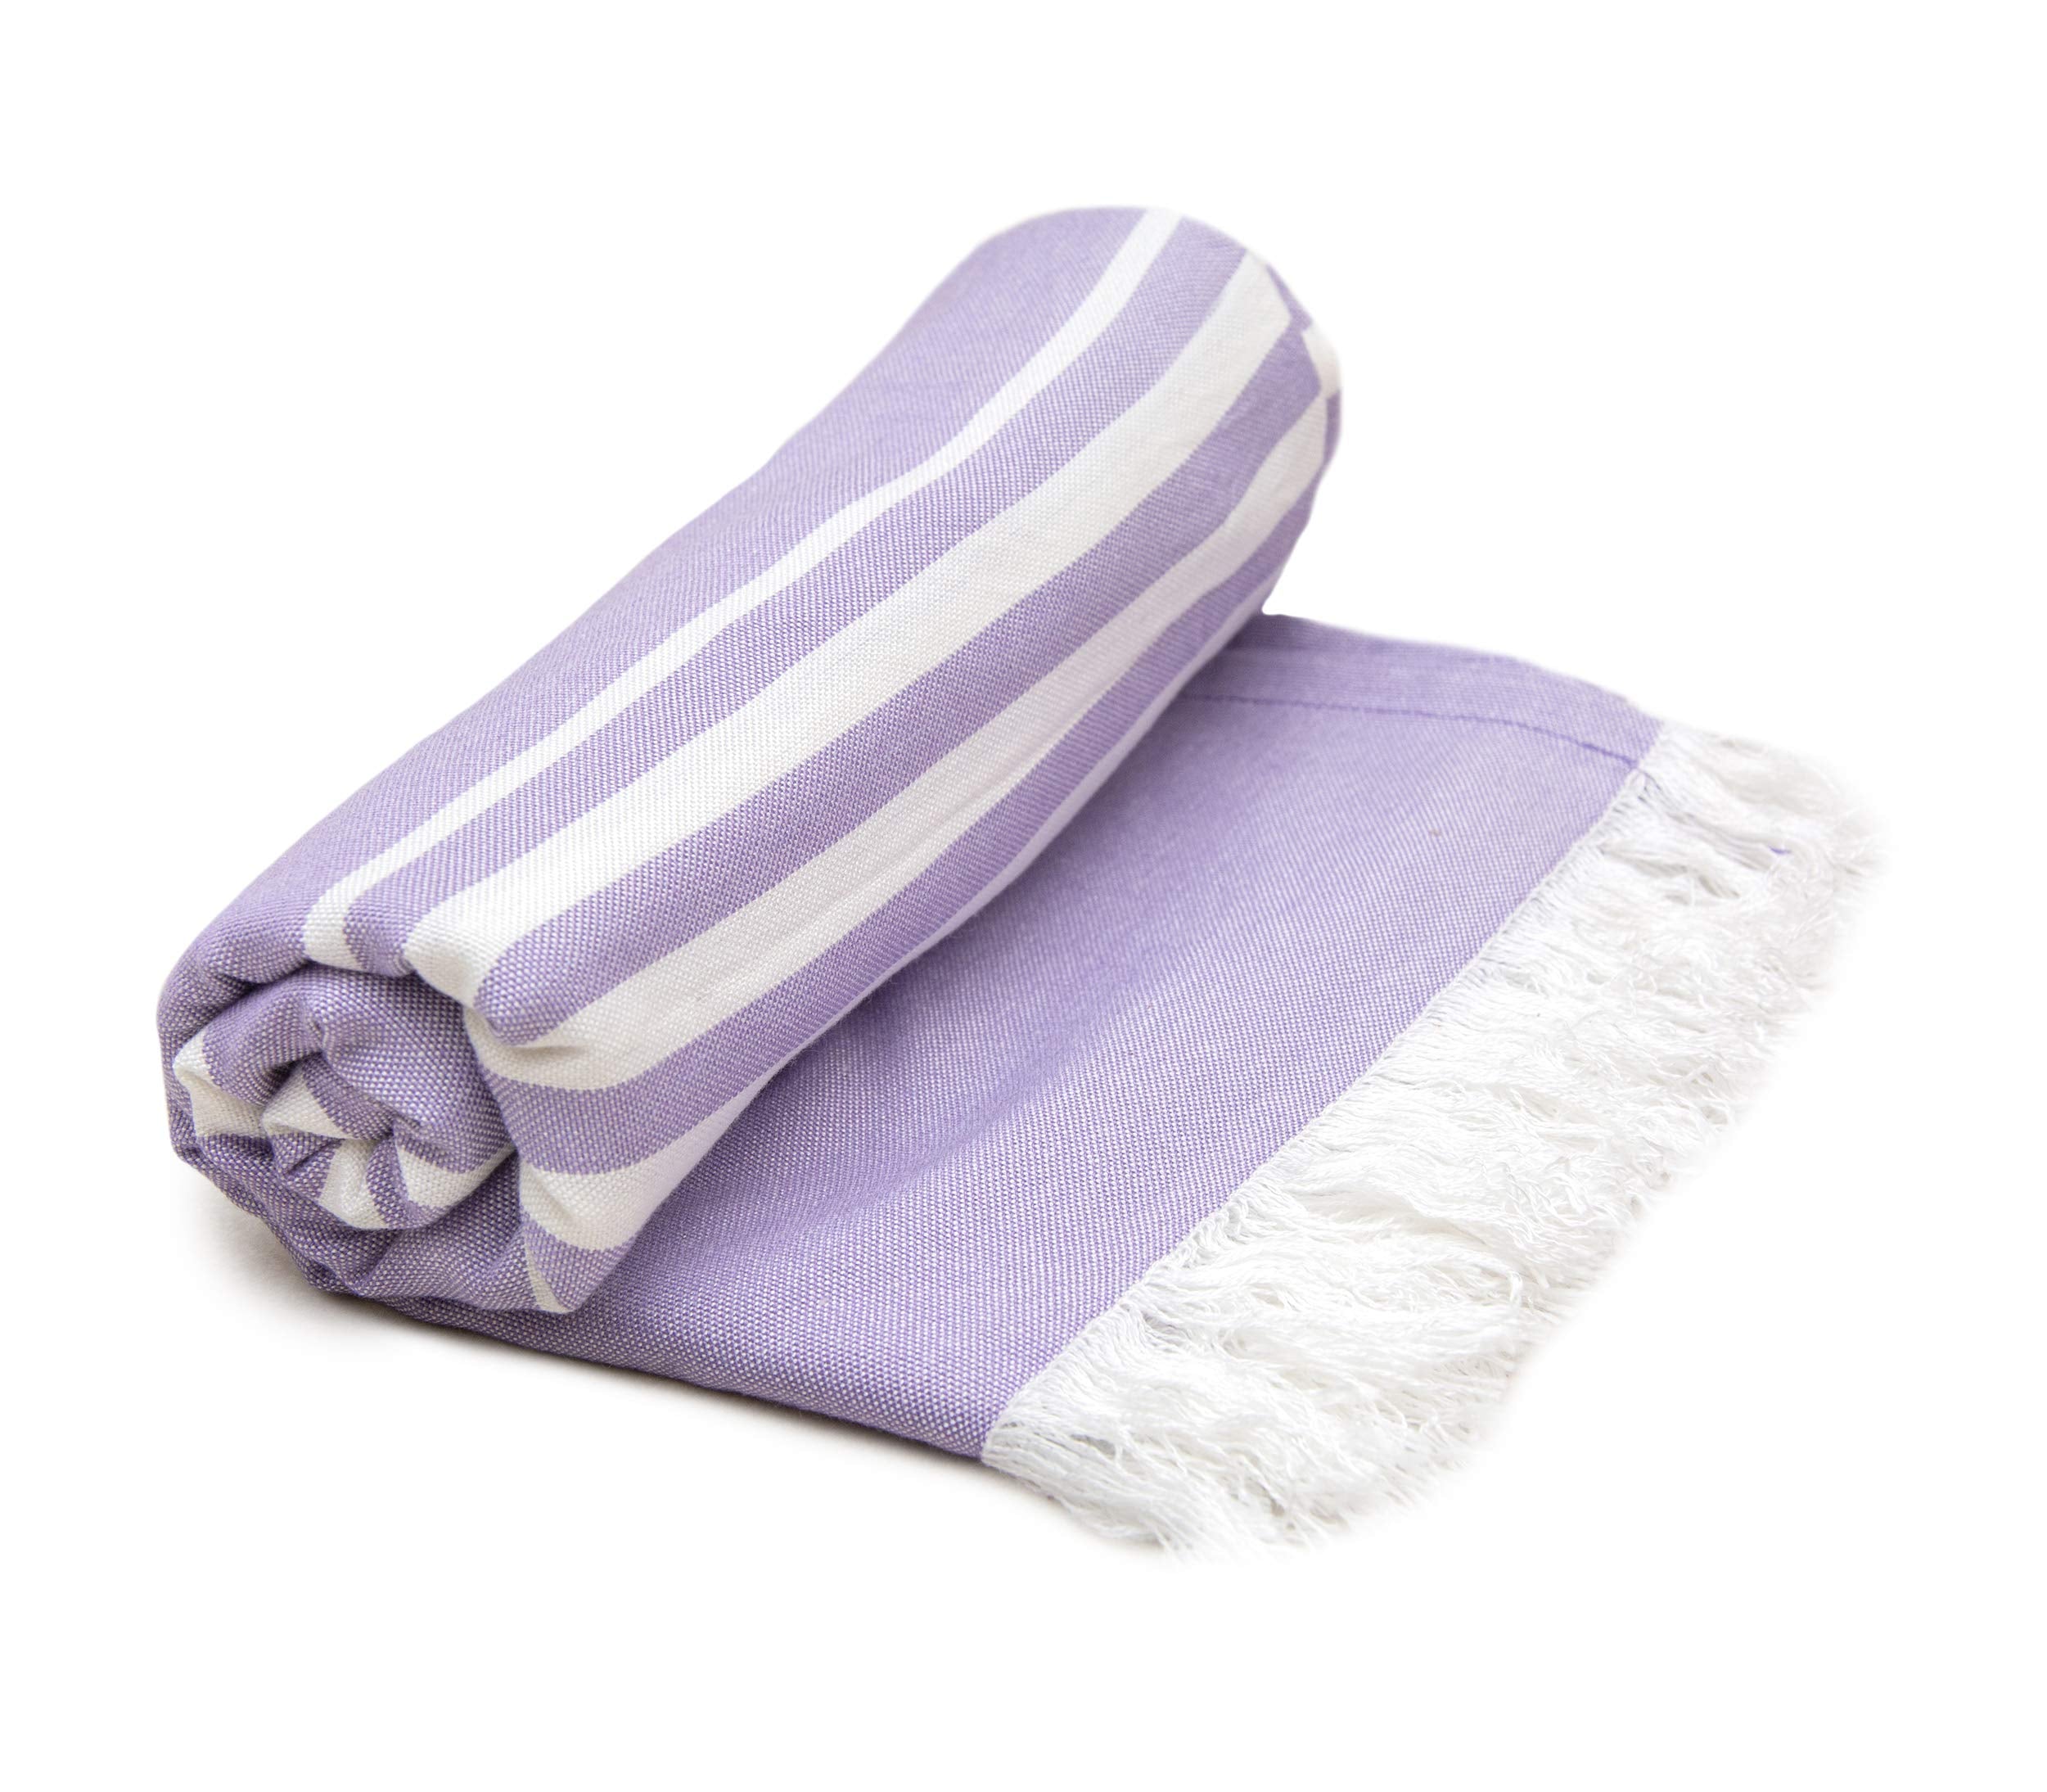 Mush 100% Bamboo Large Bath Towel | Ultra Soft, Absorbent, Light Weight, & Quick Dry Towel for Bath, Travel, Gym, Beach, Pool, and Yoga | 29 x 59 Inches / 75 X 150 cms Set of 1 - Lavender